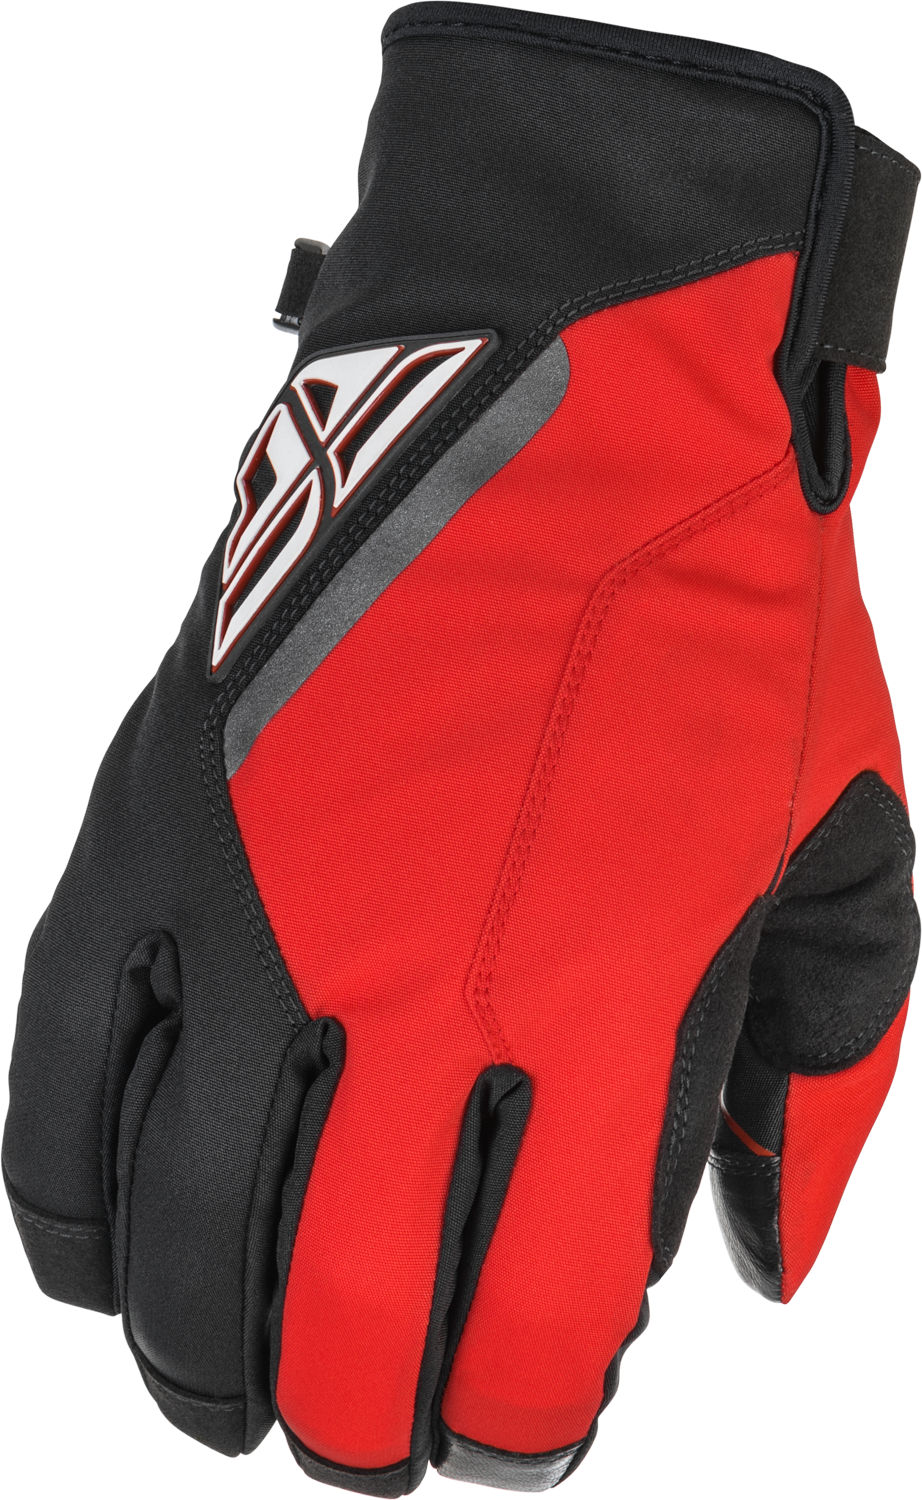 FLY RACING Title Gloves Black/Red Sz 12 371-05312